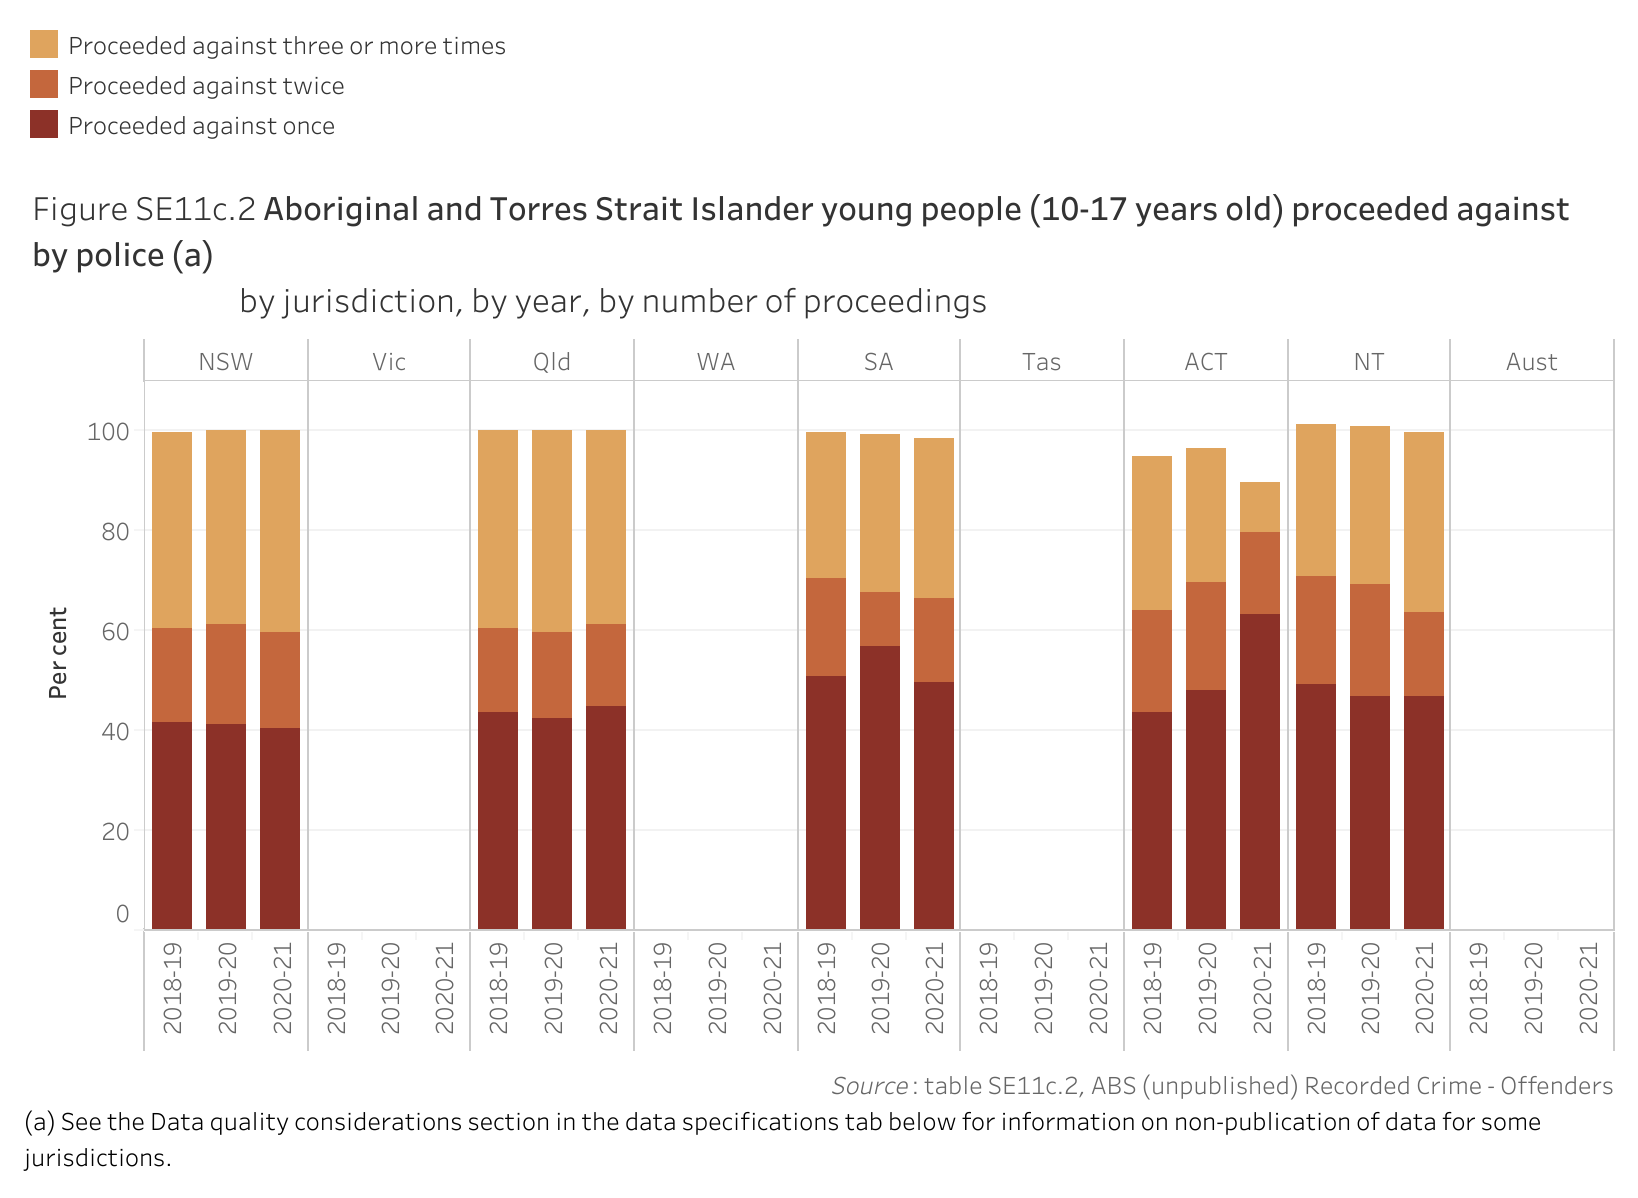 Figure SE11c.2. Bar chart showing the proportion of Aboriginal and Torres Strait Islander young people (10-17 years old) who were proceeded against by police by number of proceedings, by jurisdiction and by year. Data table of figure SE11c.2 is below.